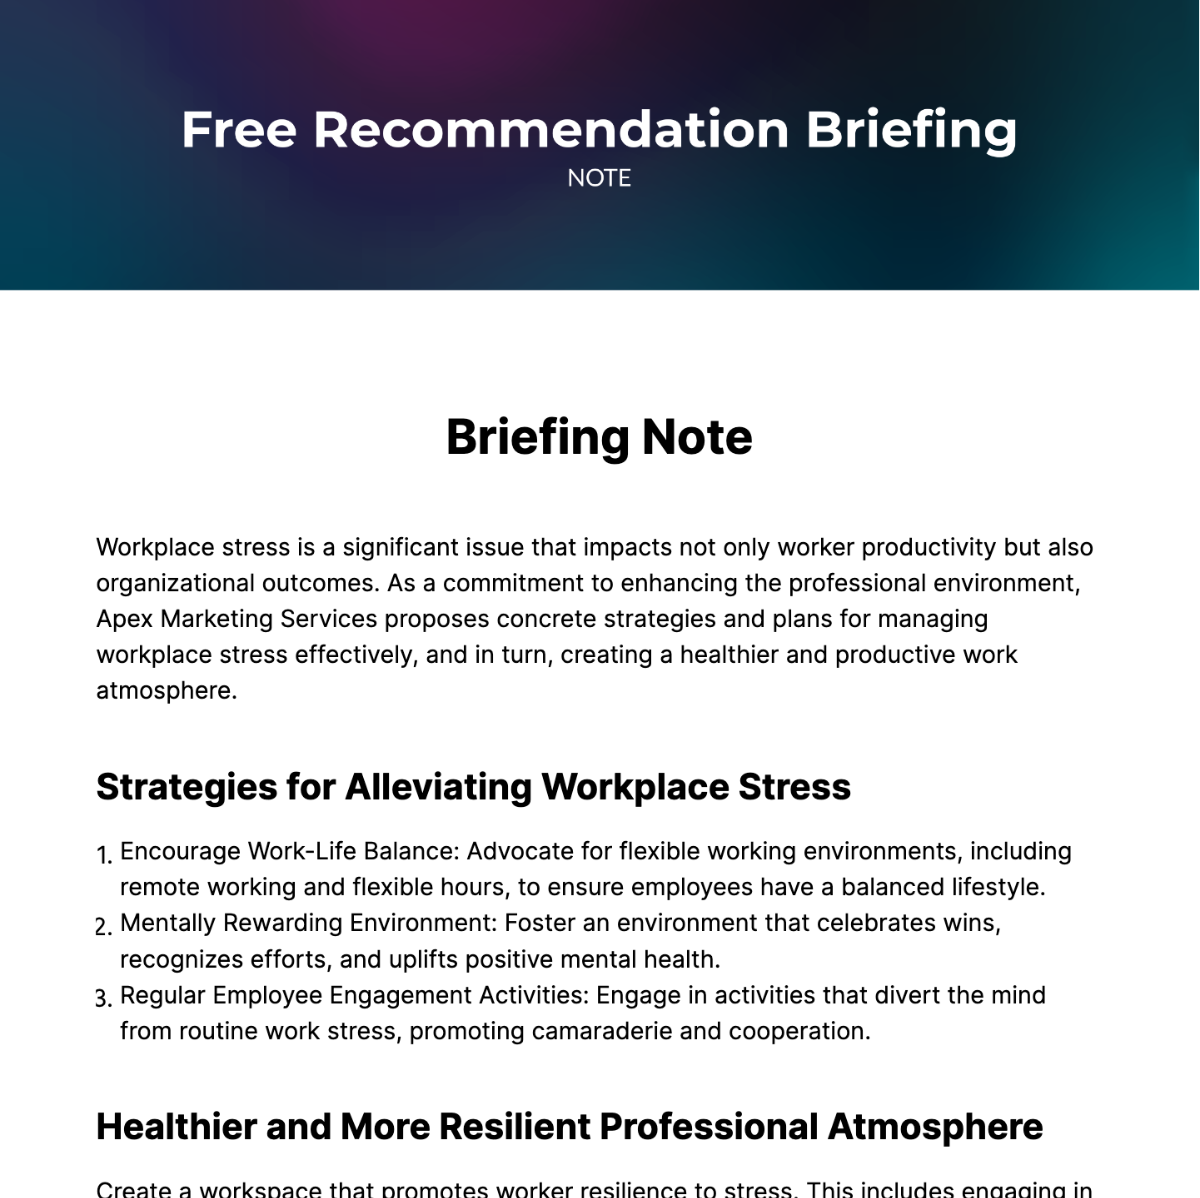 Free Recommendation Briefing Note Template